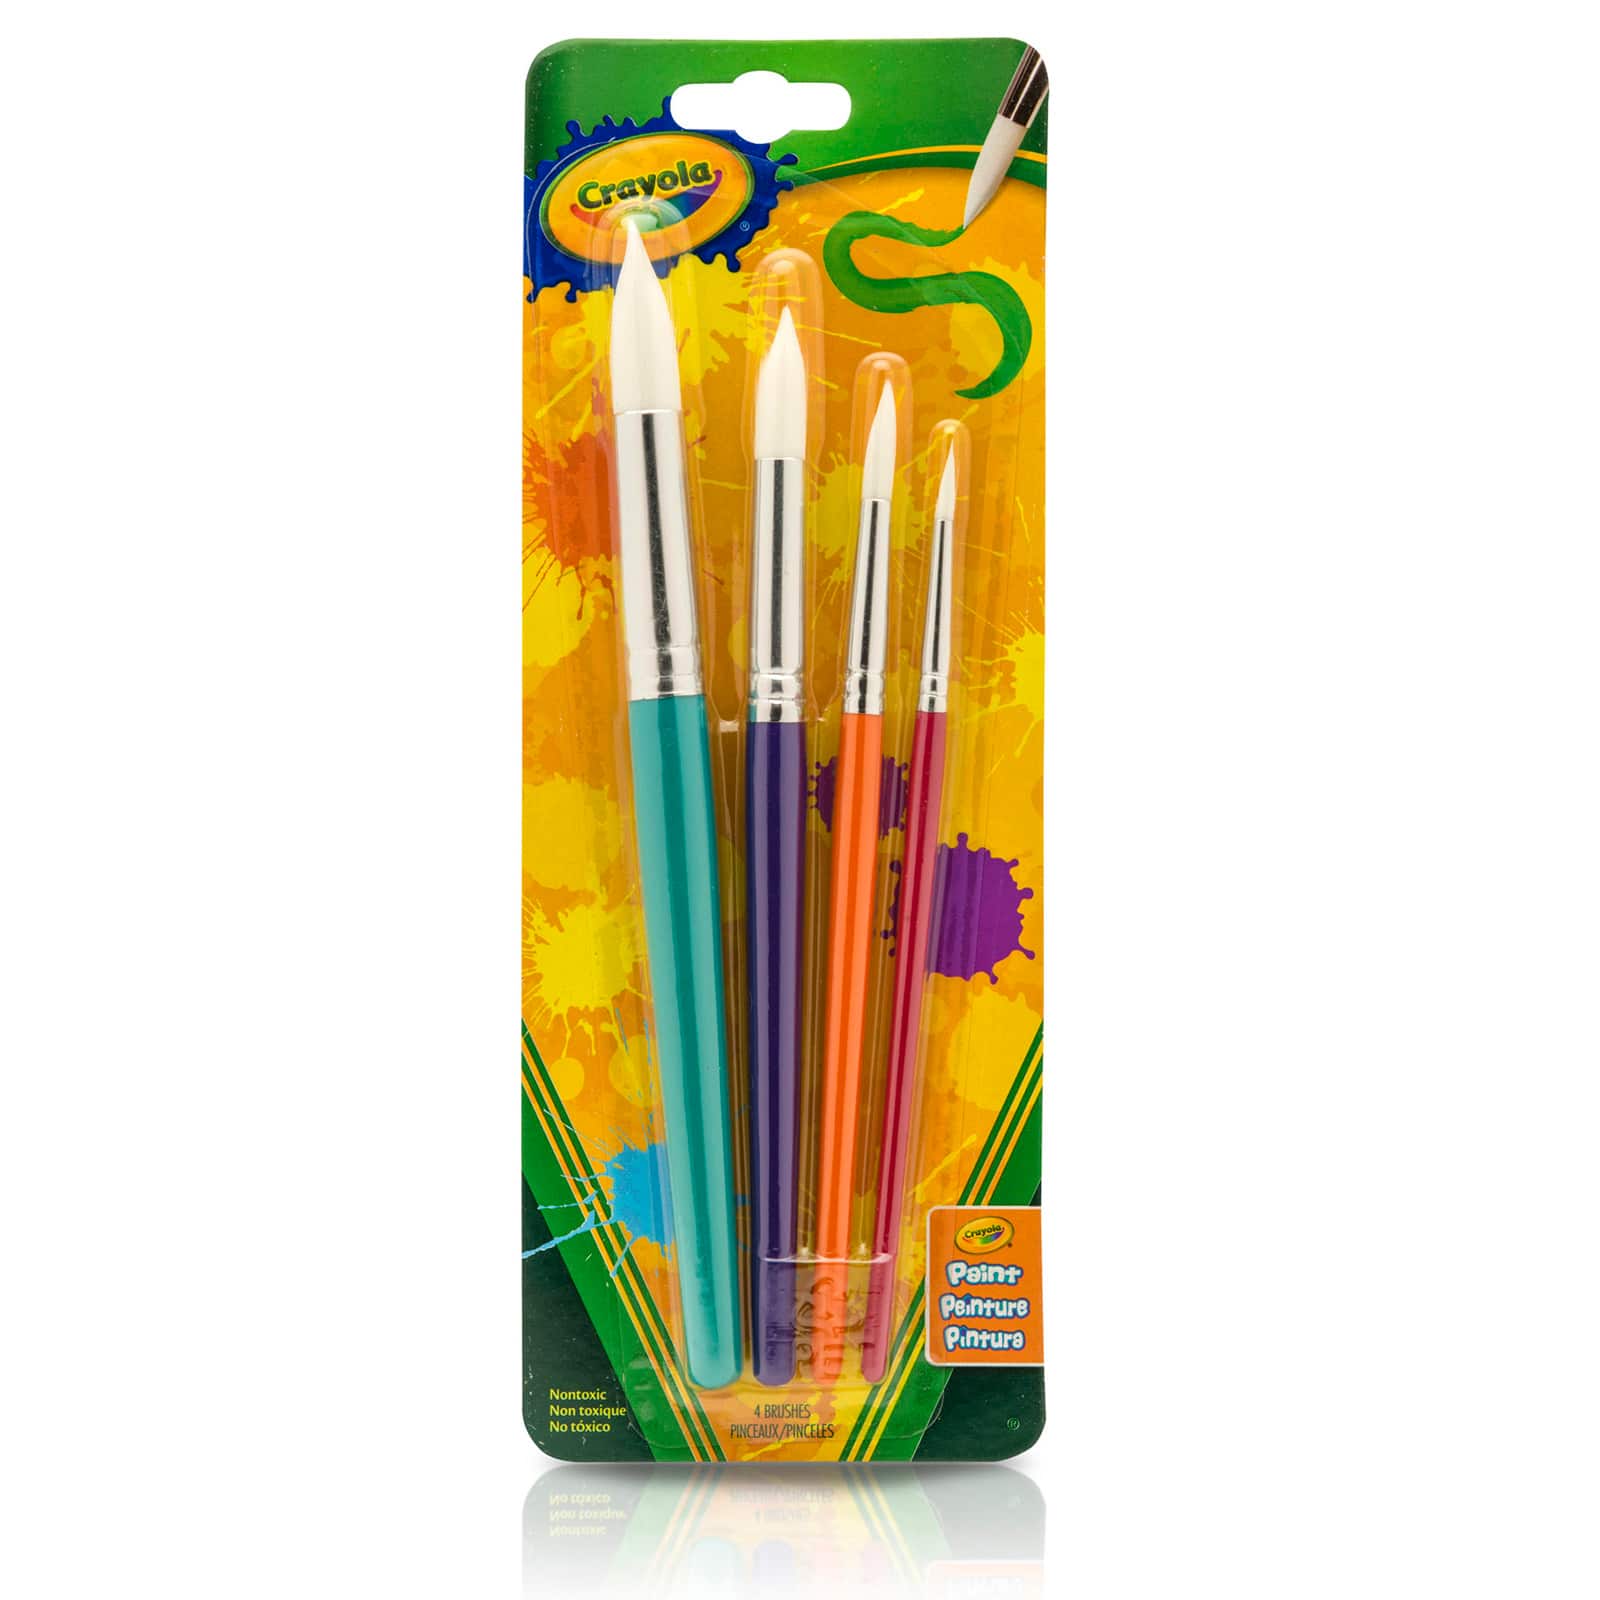 12 Packs: 18 ct. (216 total) Paint Brushes by Creatology®